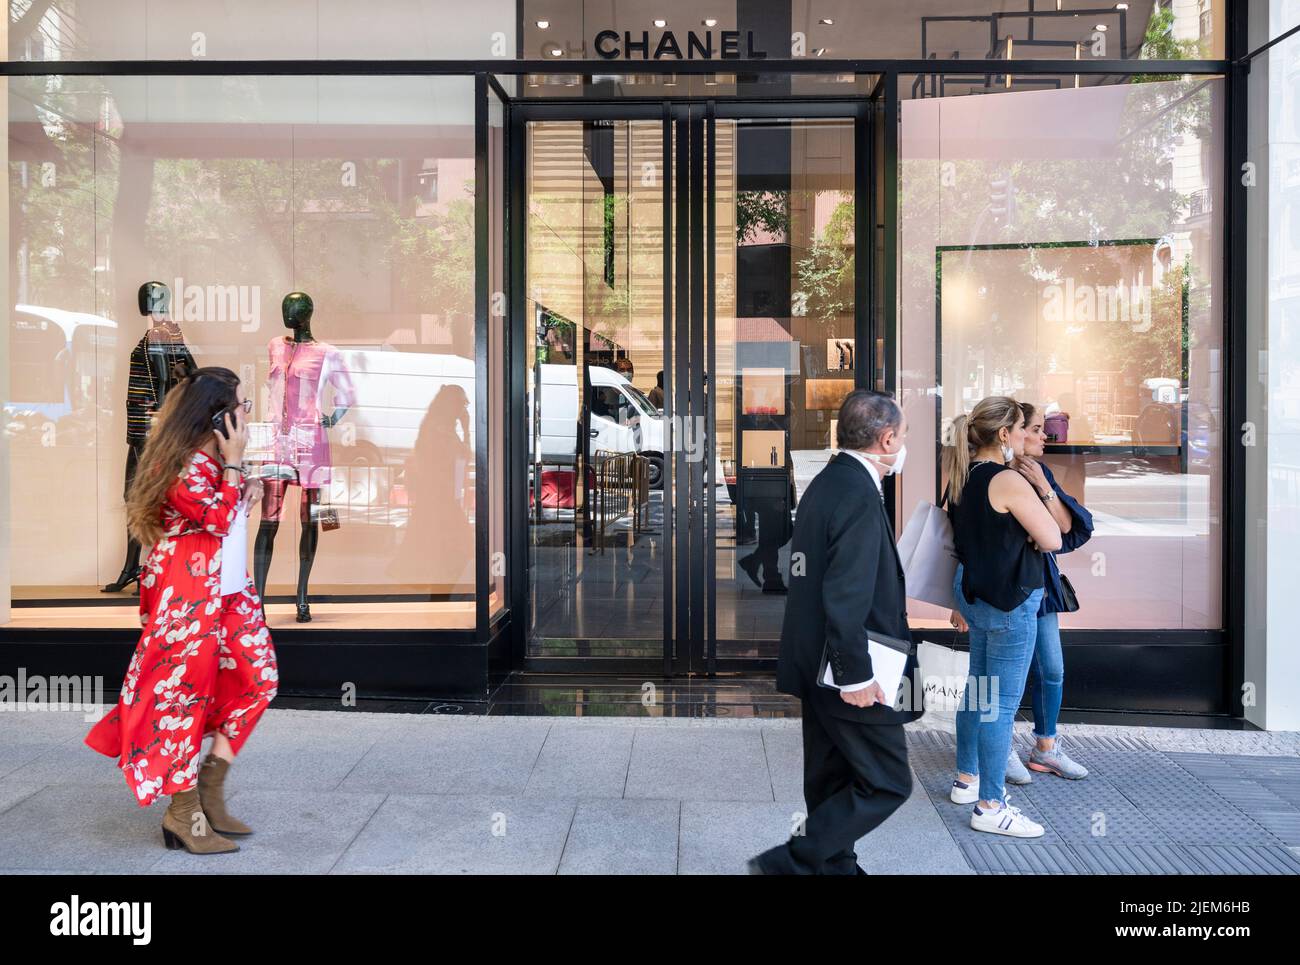 Classy aesthetic Chanel boutique entrance. Chanel is a fashion house  founded in 1909 specialized in haute couture goods Stock Photo - Alamy